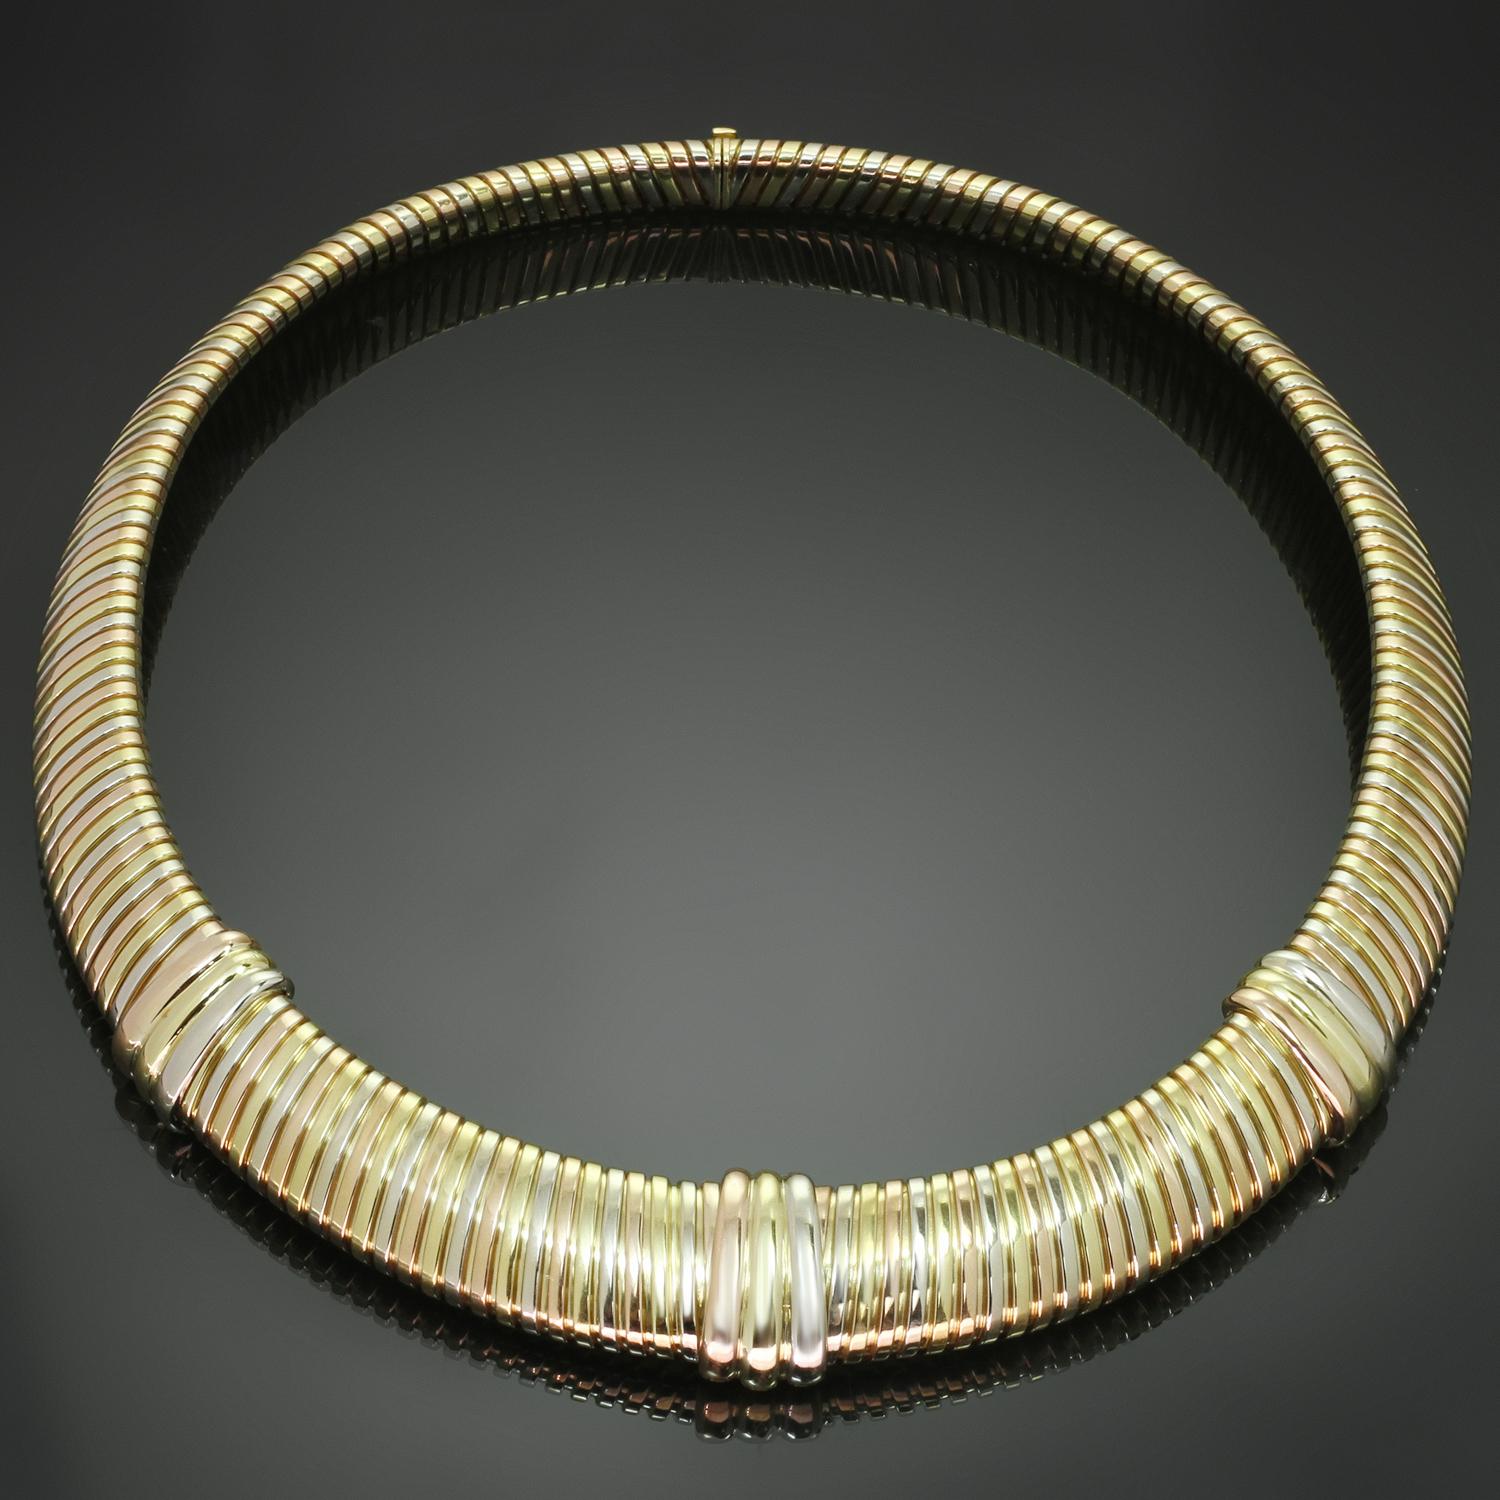 This gorgeous Cartier Trinity collar necklace reminiscent of the iconic Tubogas collection features a fluid link design crafted in 18k yellow, white, and rose gold. Made in France circa 1980s. Measurements: 0.51